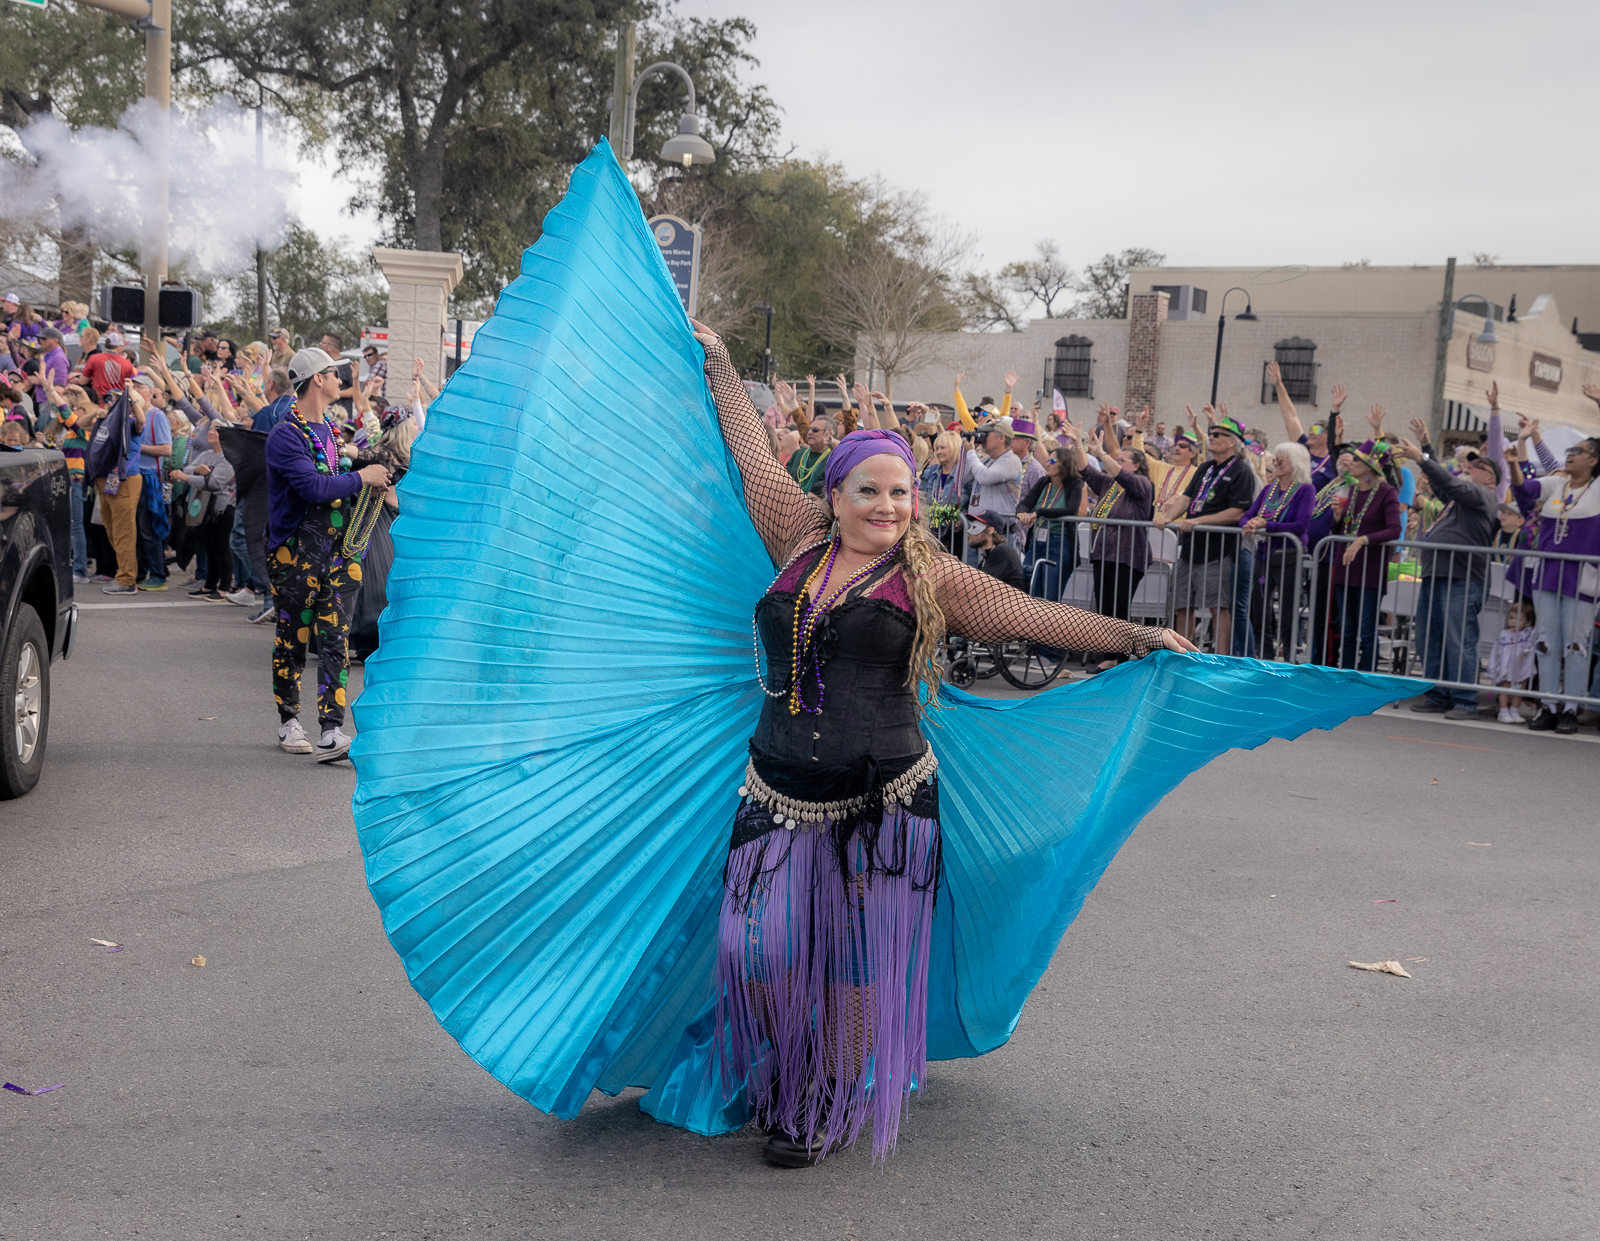 Part 2 25th Annual St. Andrews Mardi Gras on Saturday, February 3